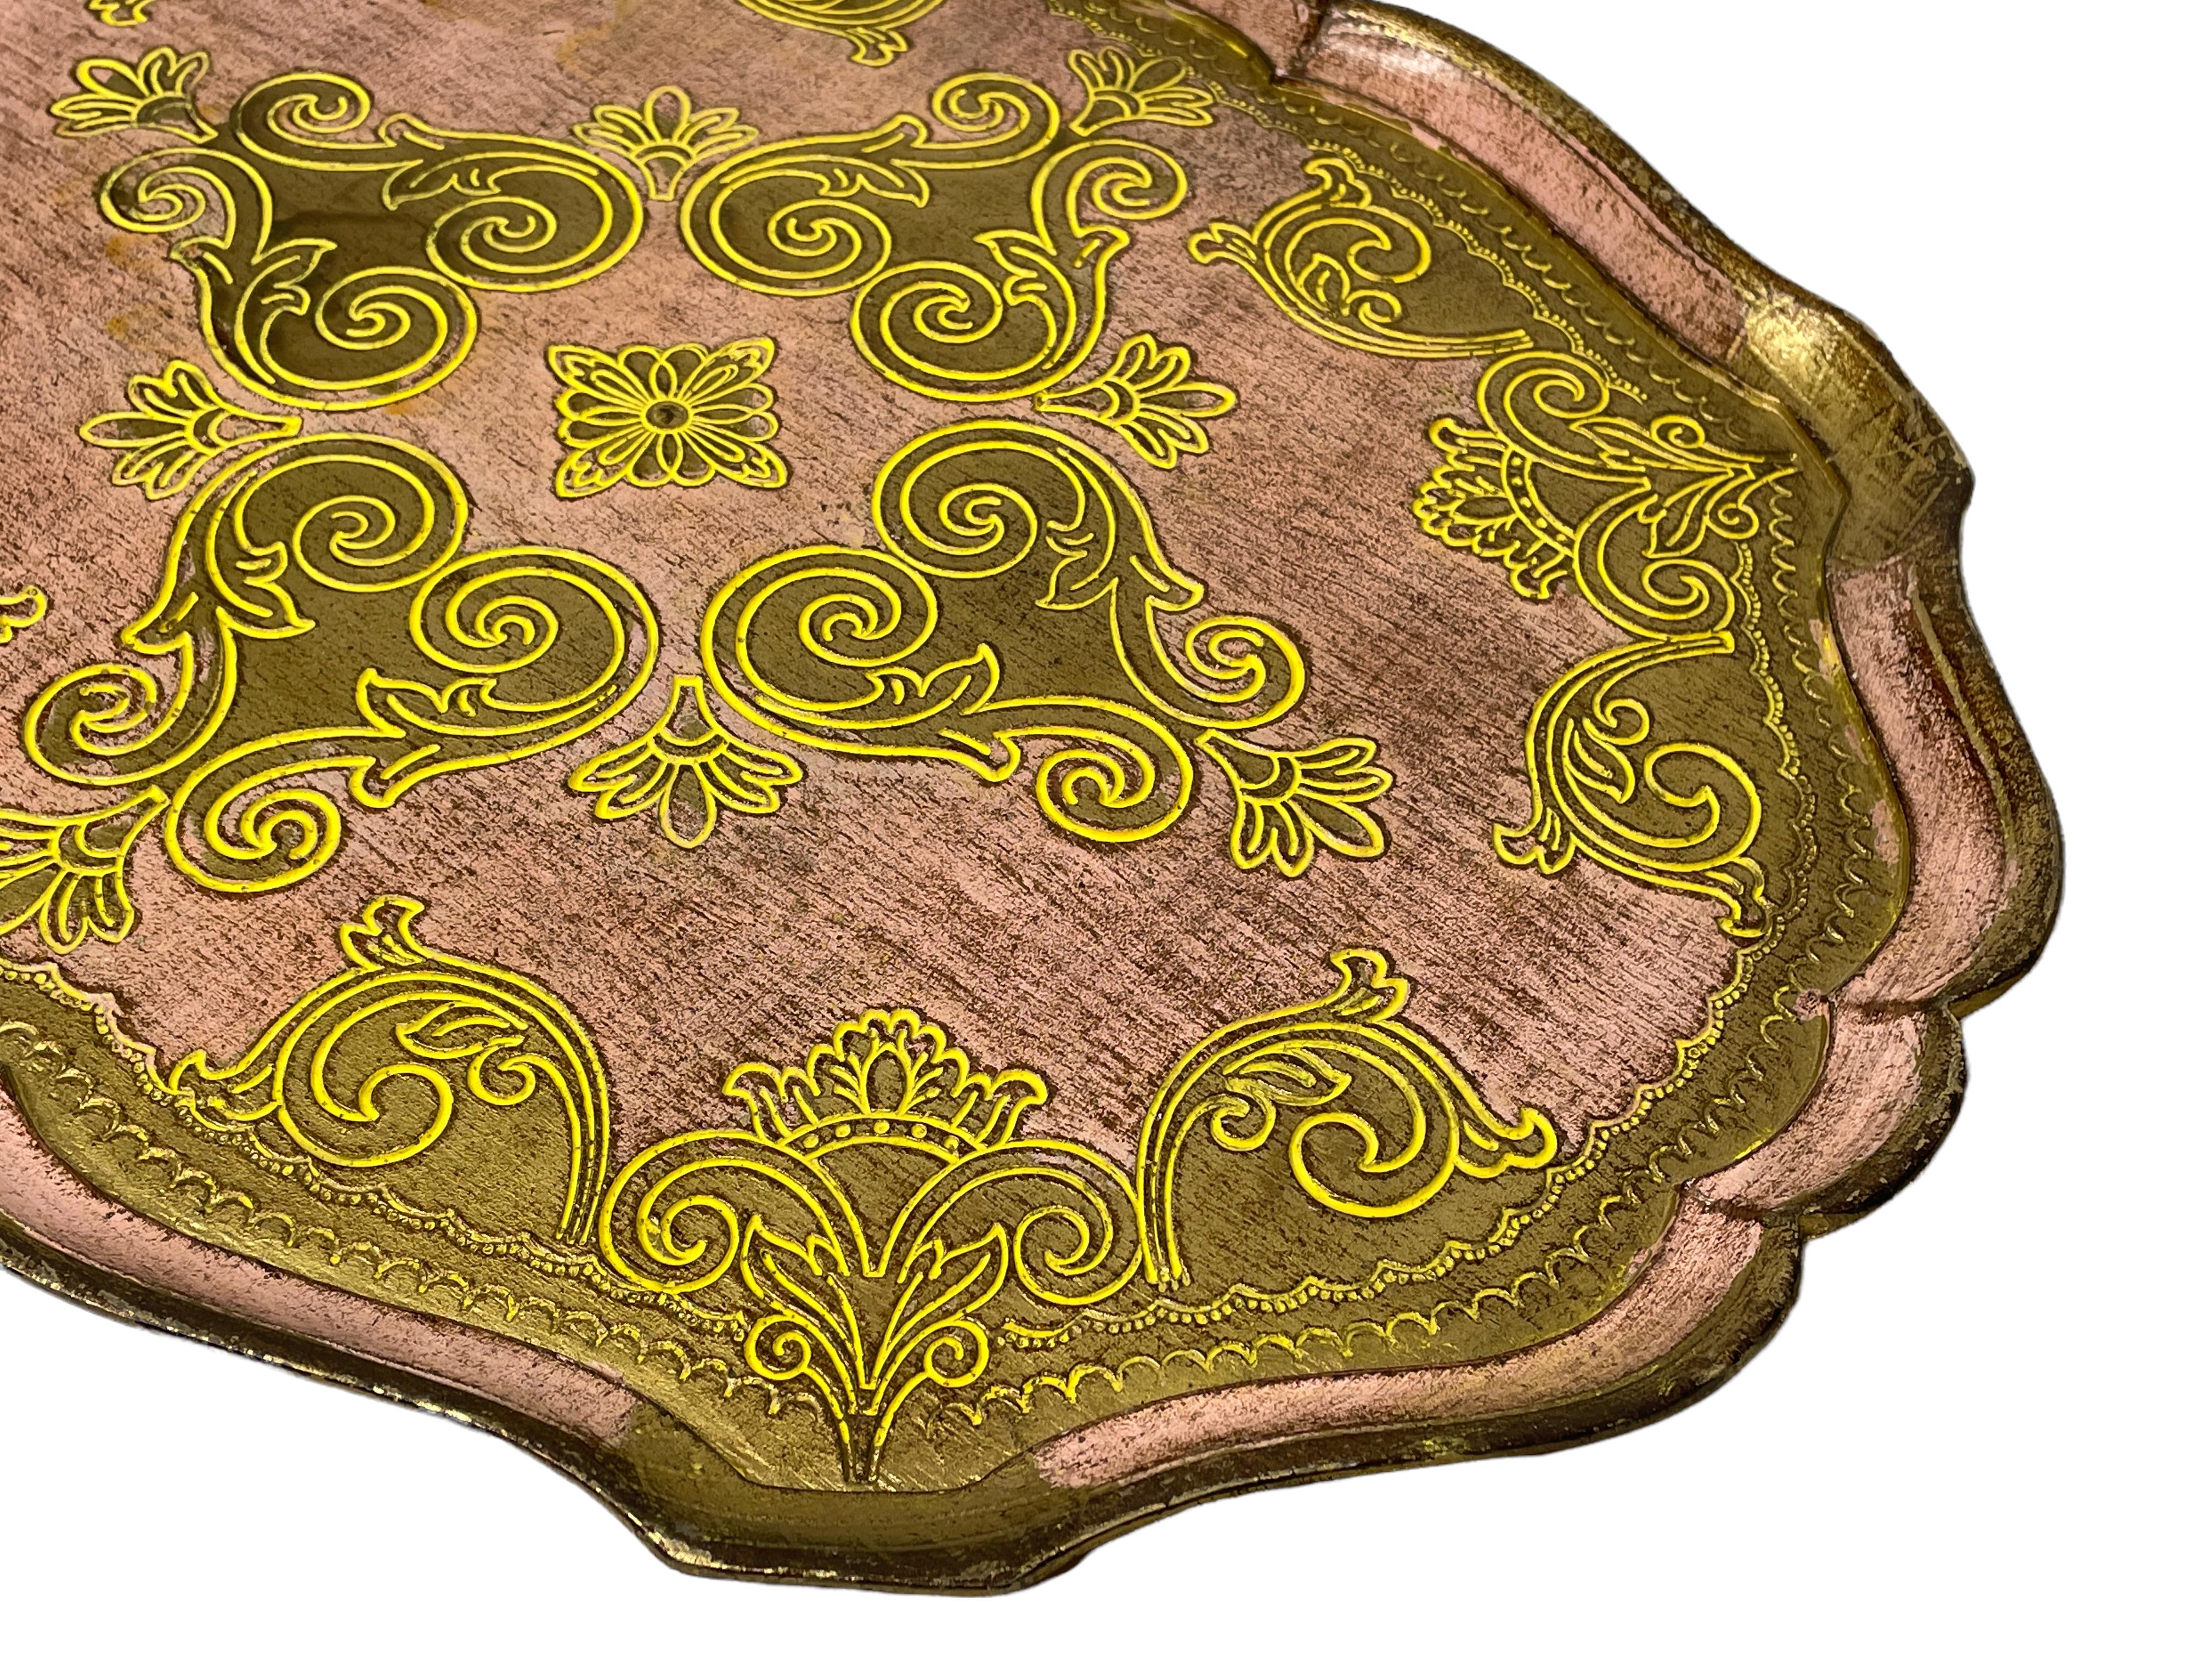 Hollywood Regency Stunning Italian Florentine Gilded Gilt Wood Serving Tray Toleware Tole, 1960s For Sale